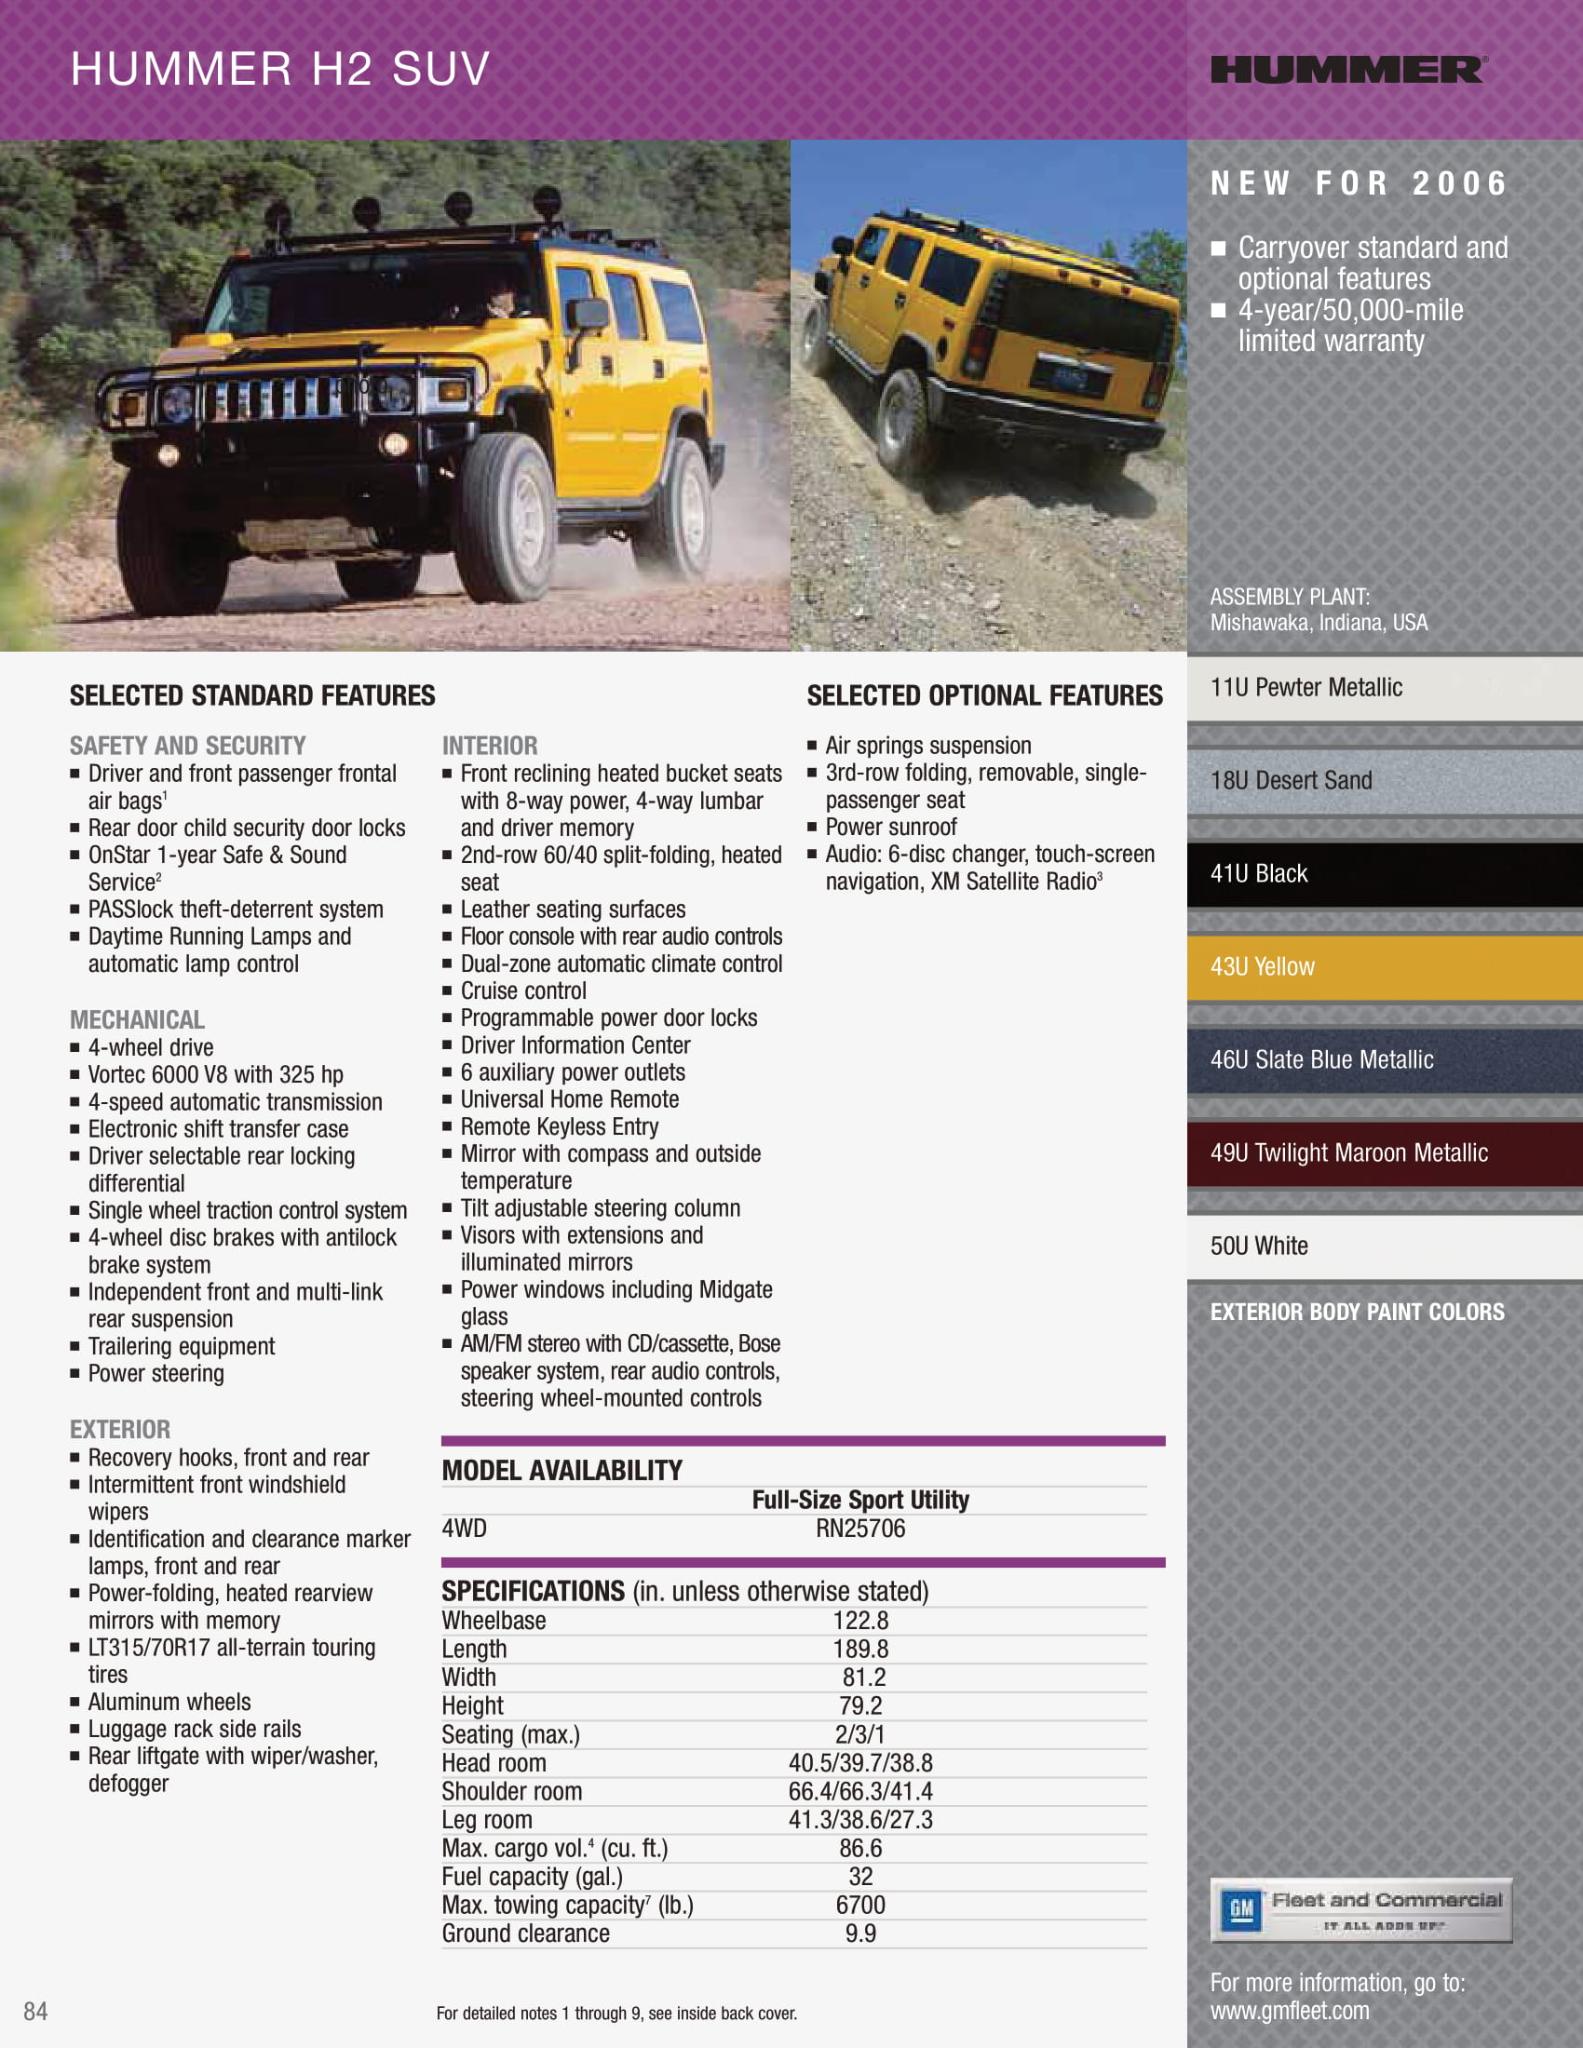 Colors used on Hummer H2 Vehicles in 2006